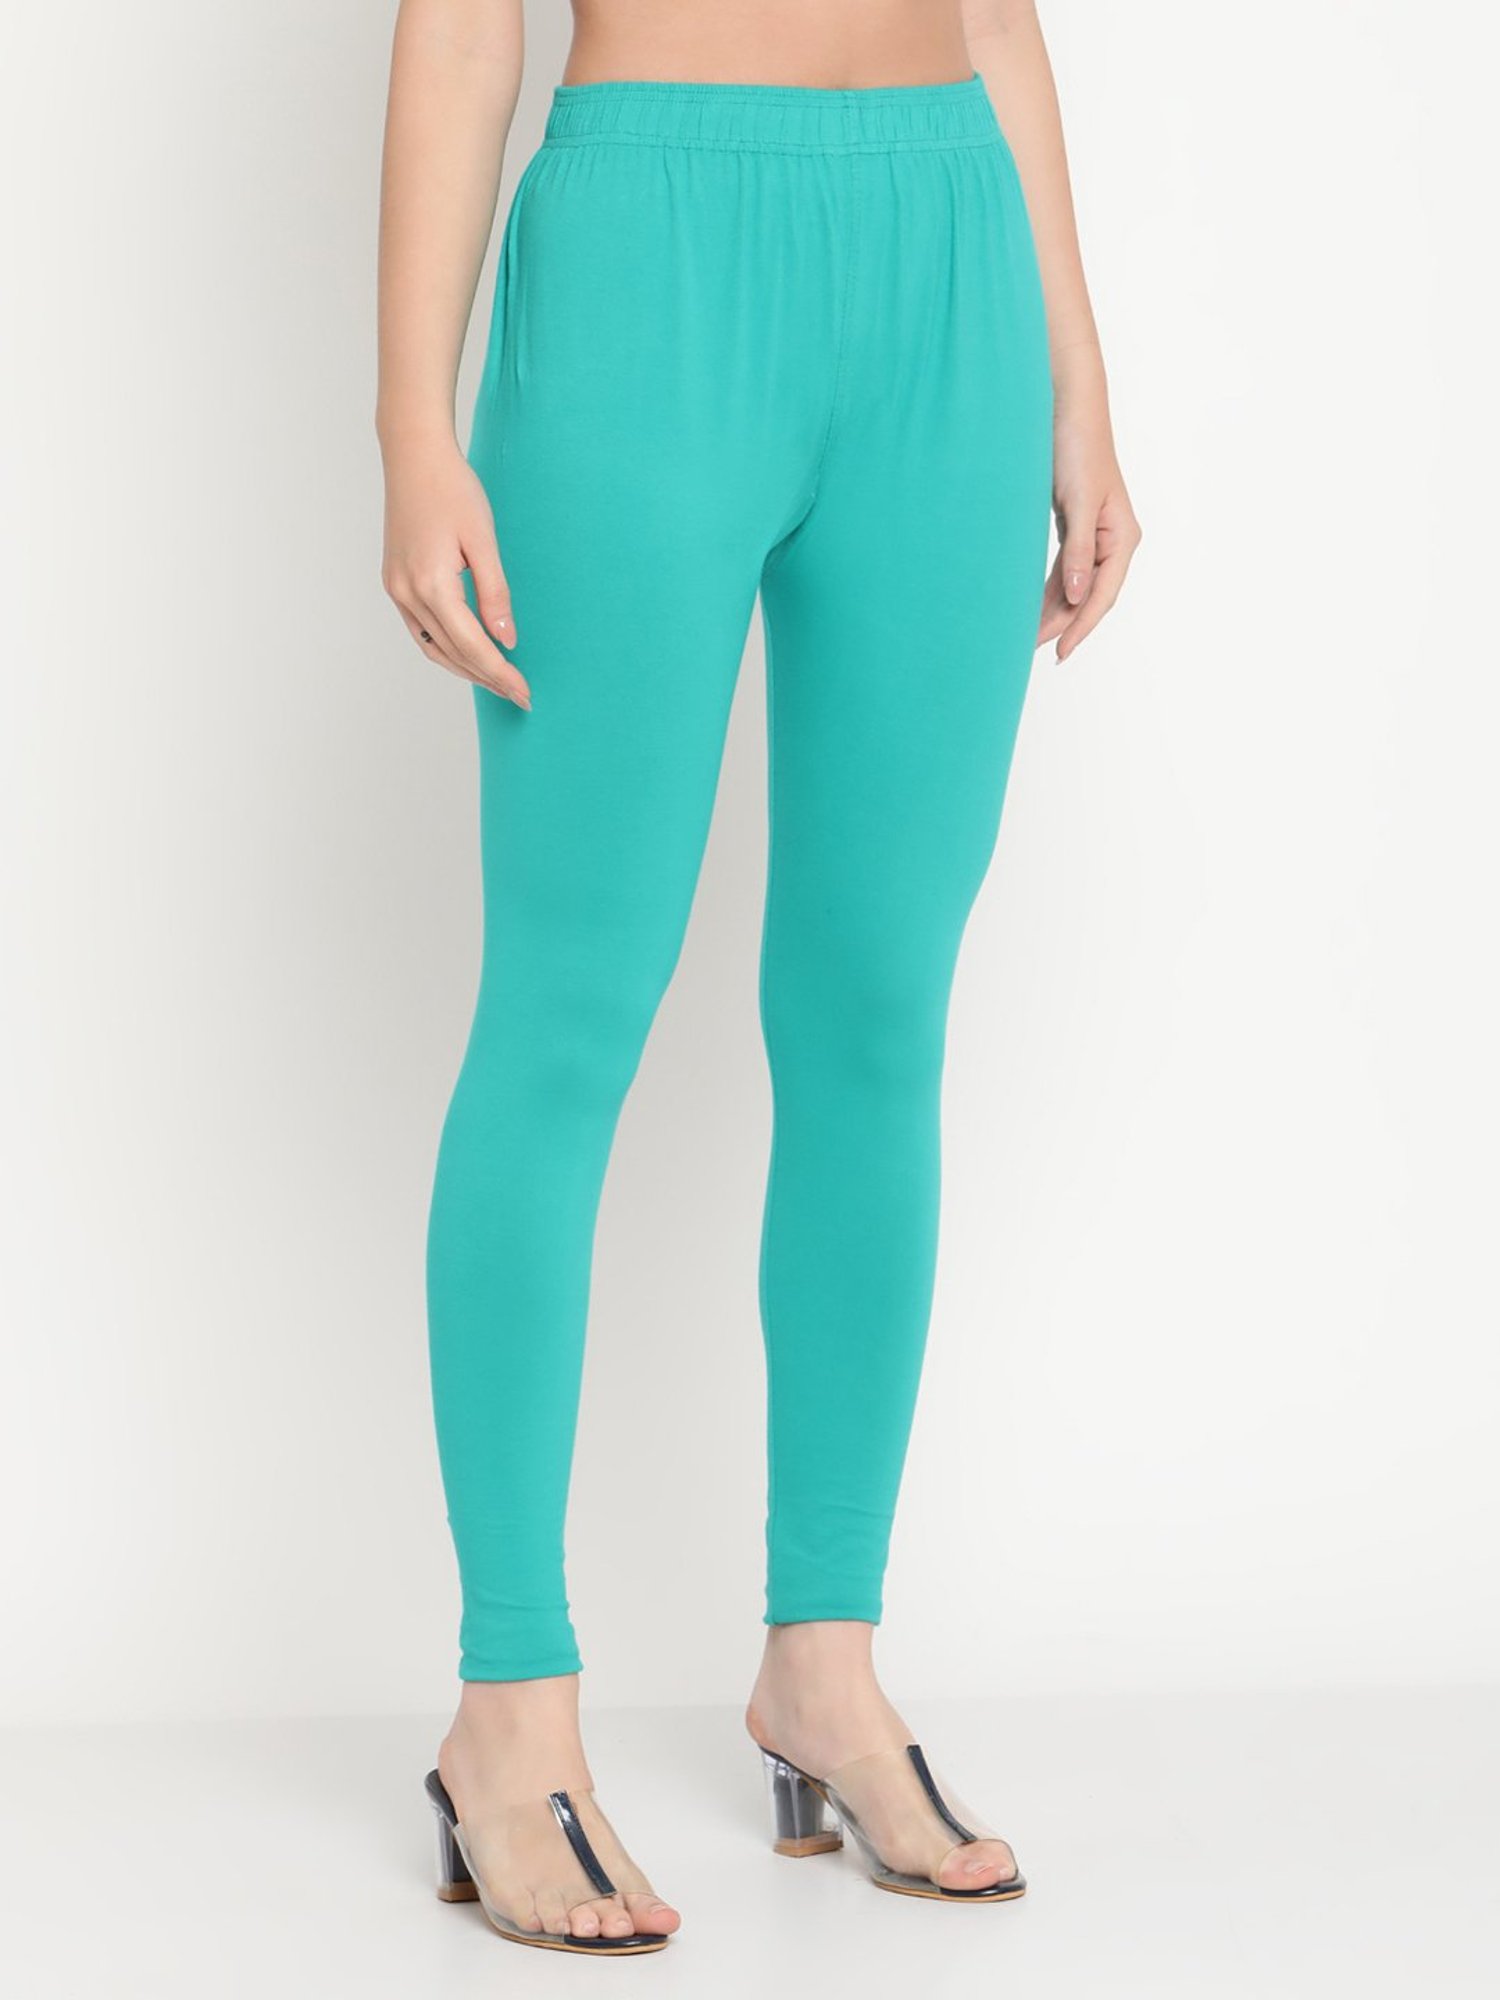 Solid Turquoise Leggings - Twisted Spur Boutique OUTLET